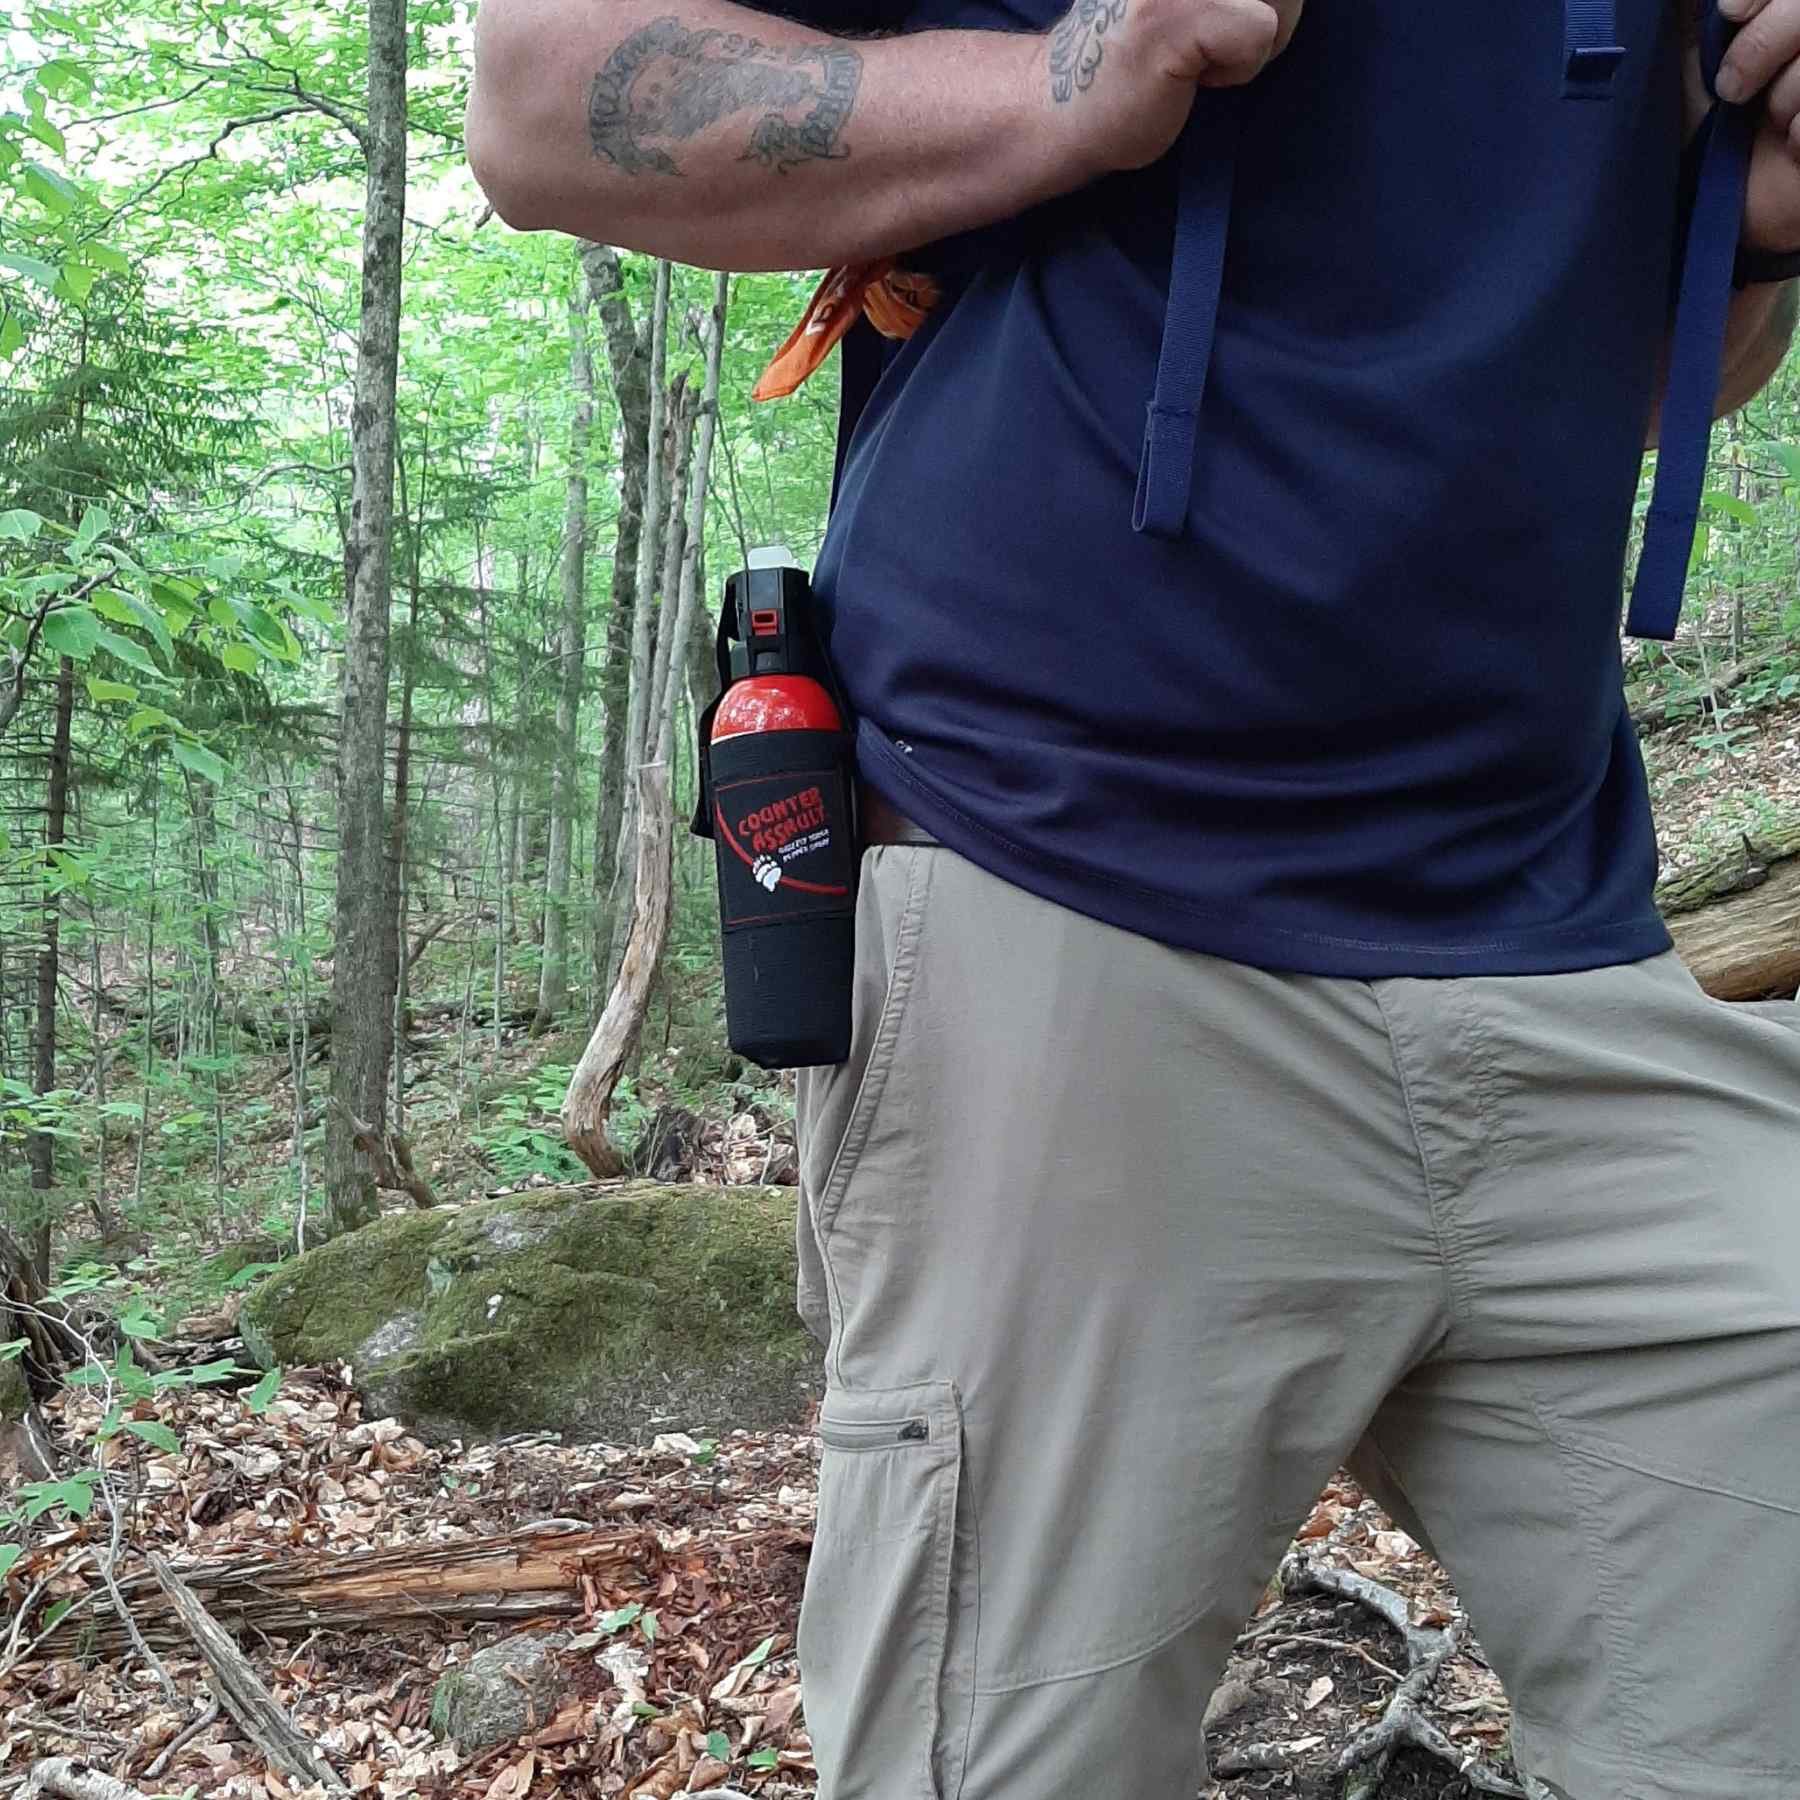 Man walking with a bear spray universal belt holster attached